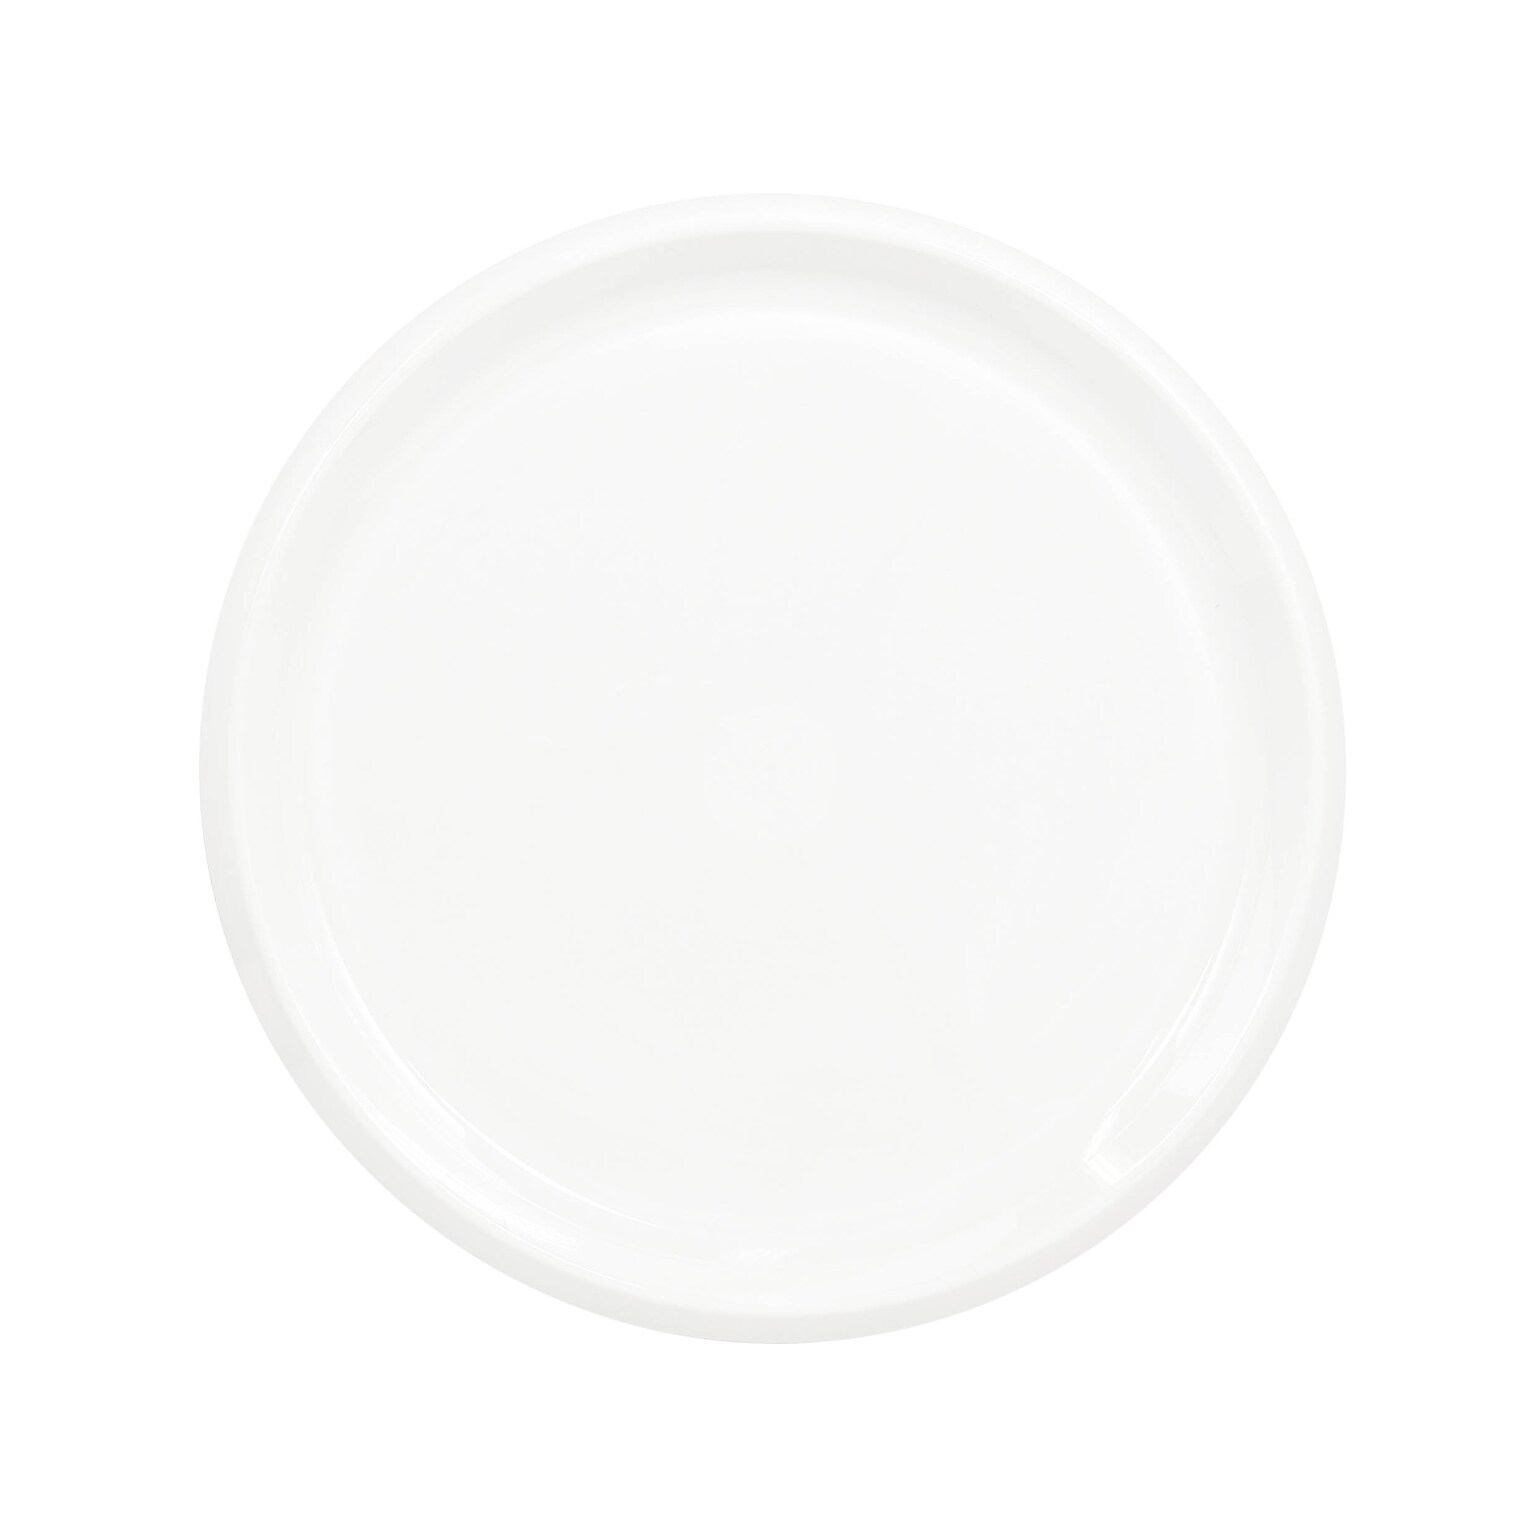 Amscan Party Platter, Frosty White, 4/Pack (432345.08)